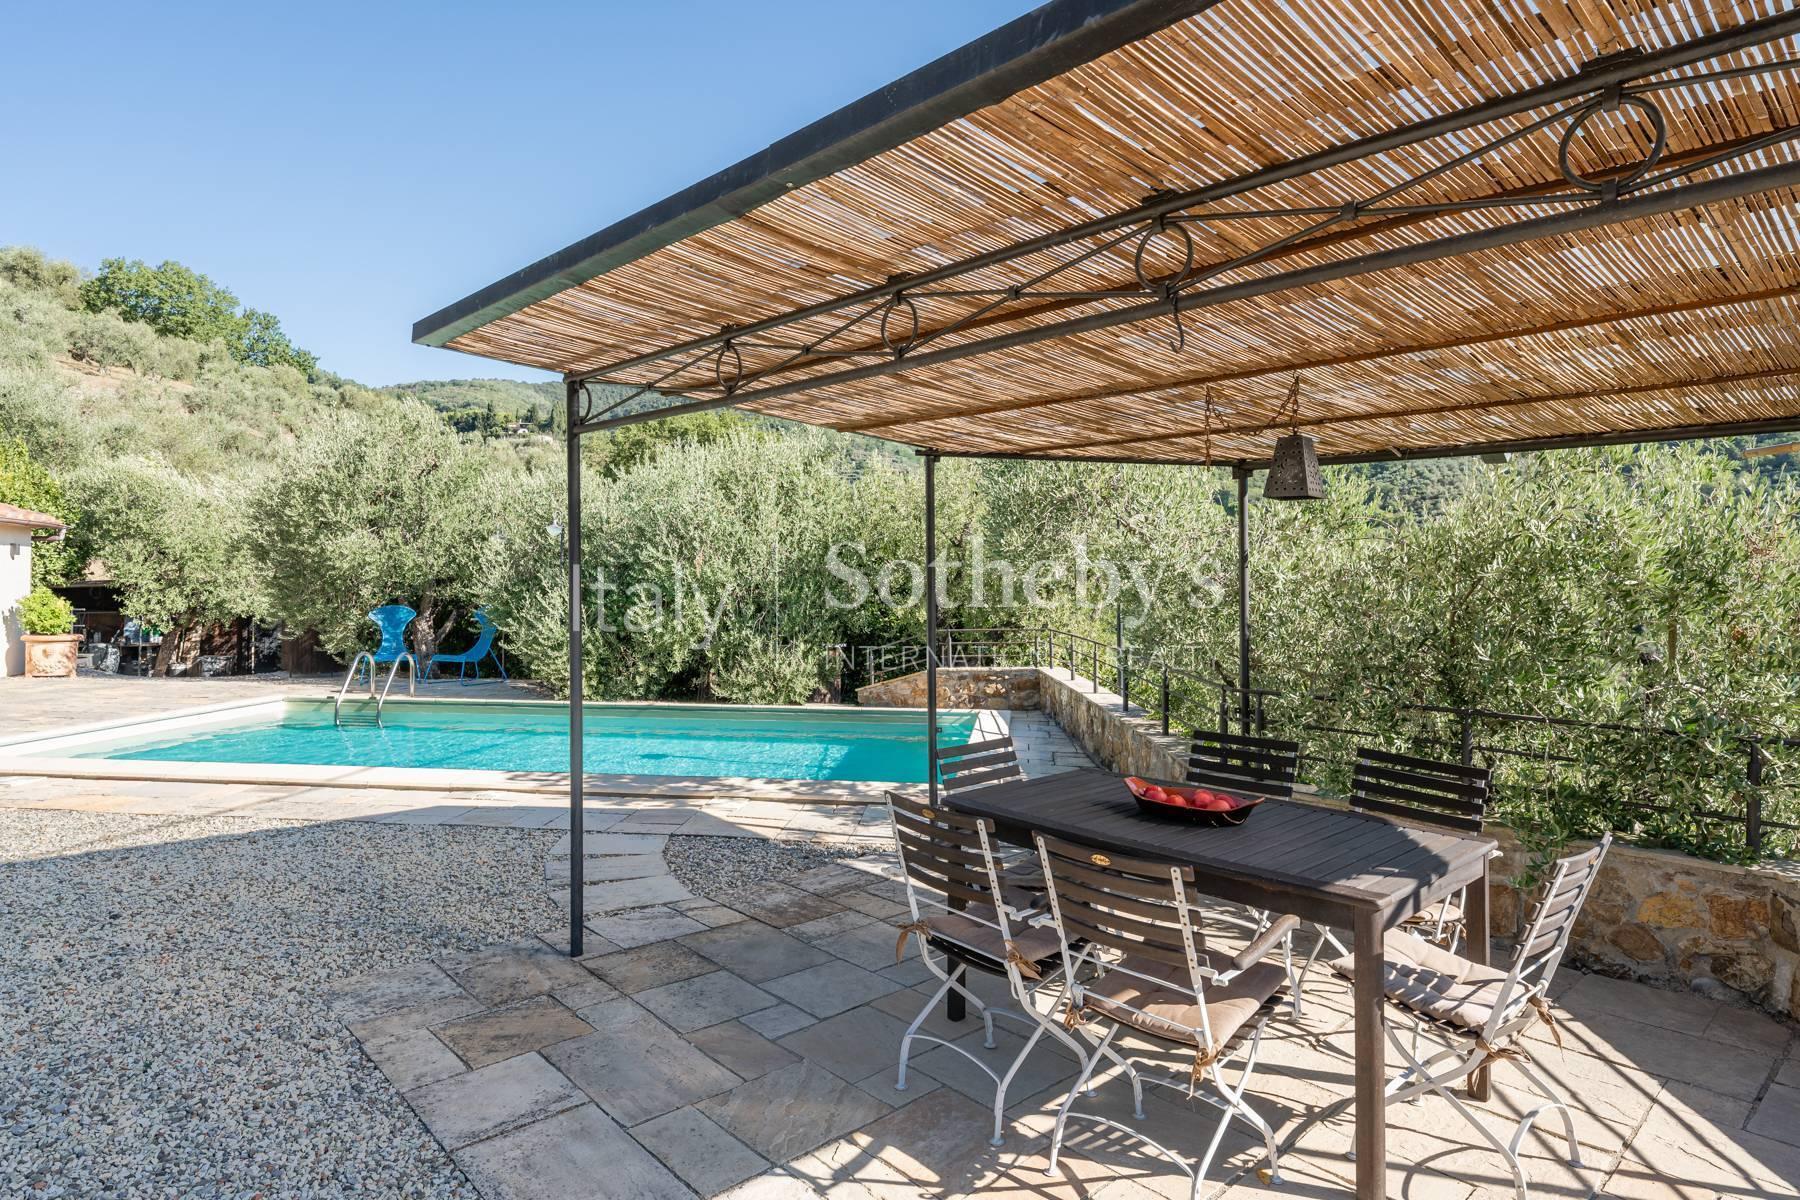 One-of-a-kind Tuscan cottage on the hills between Lucca and Montecatini Terme - 5